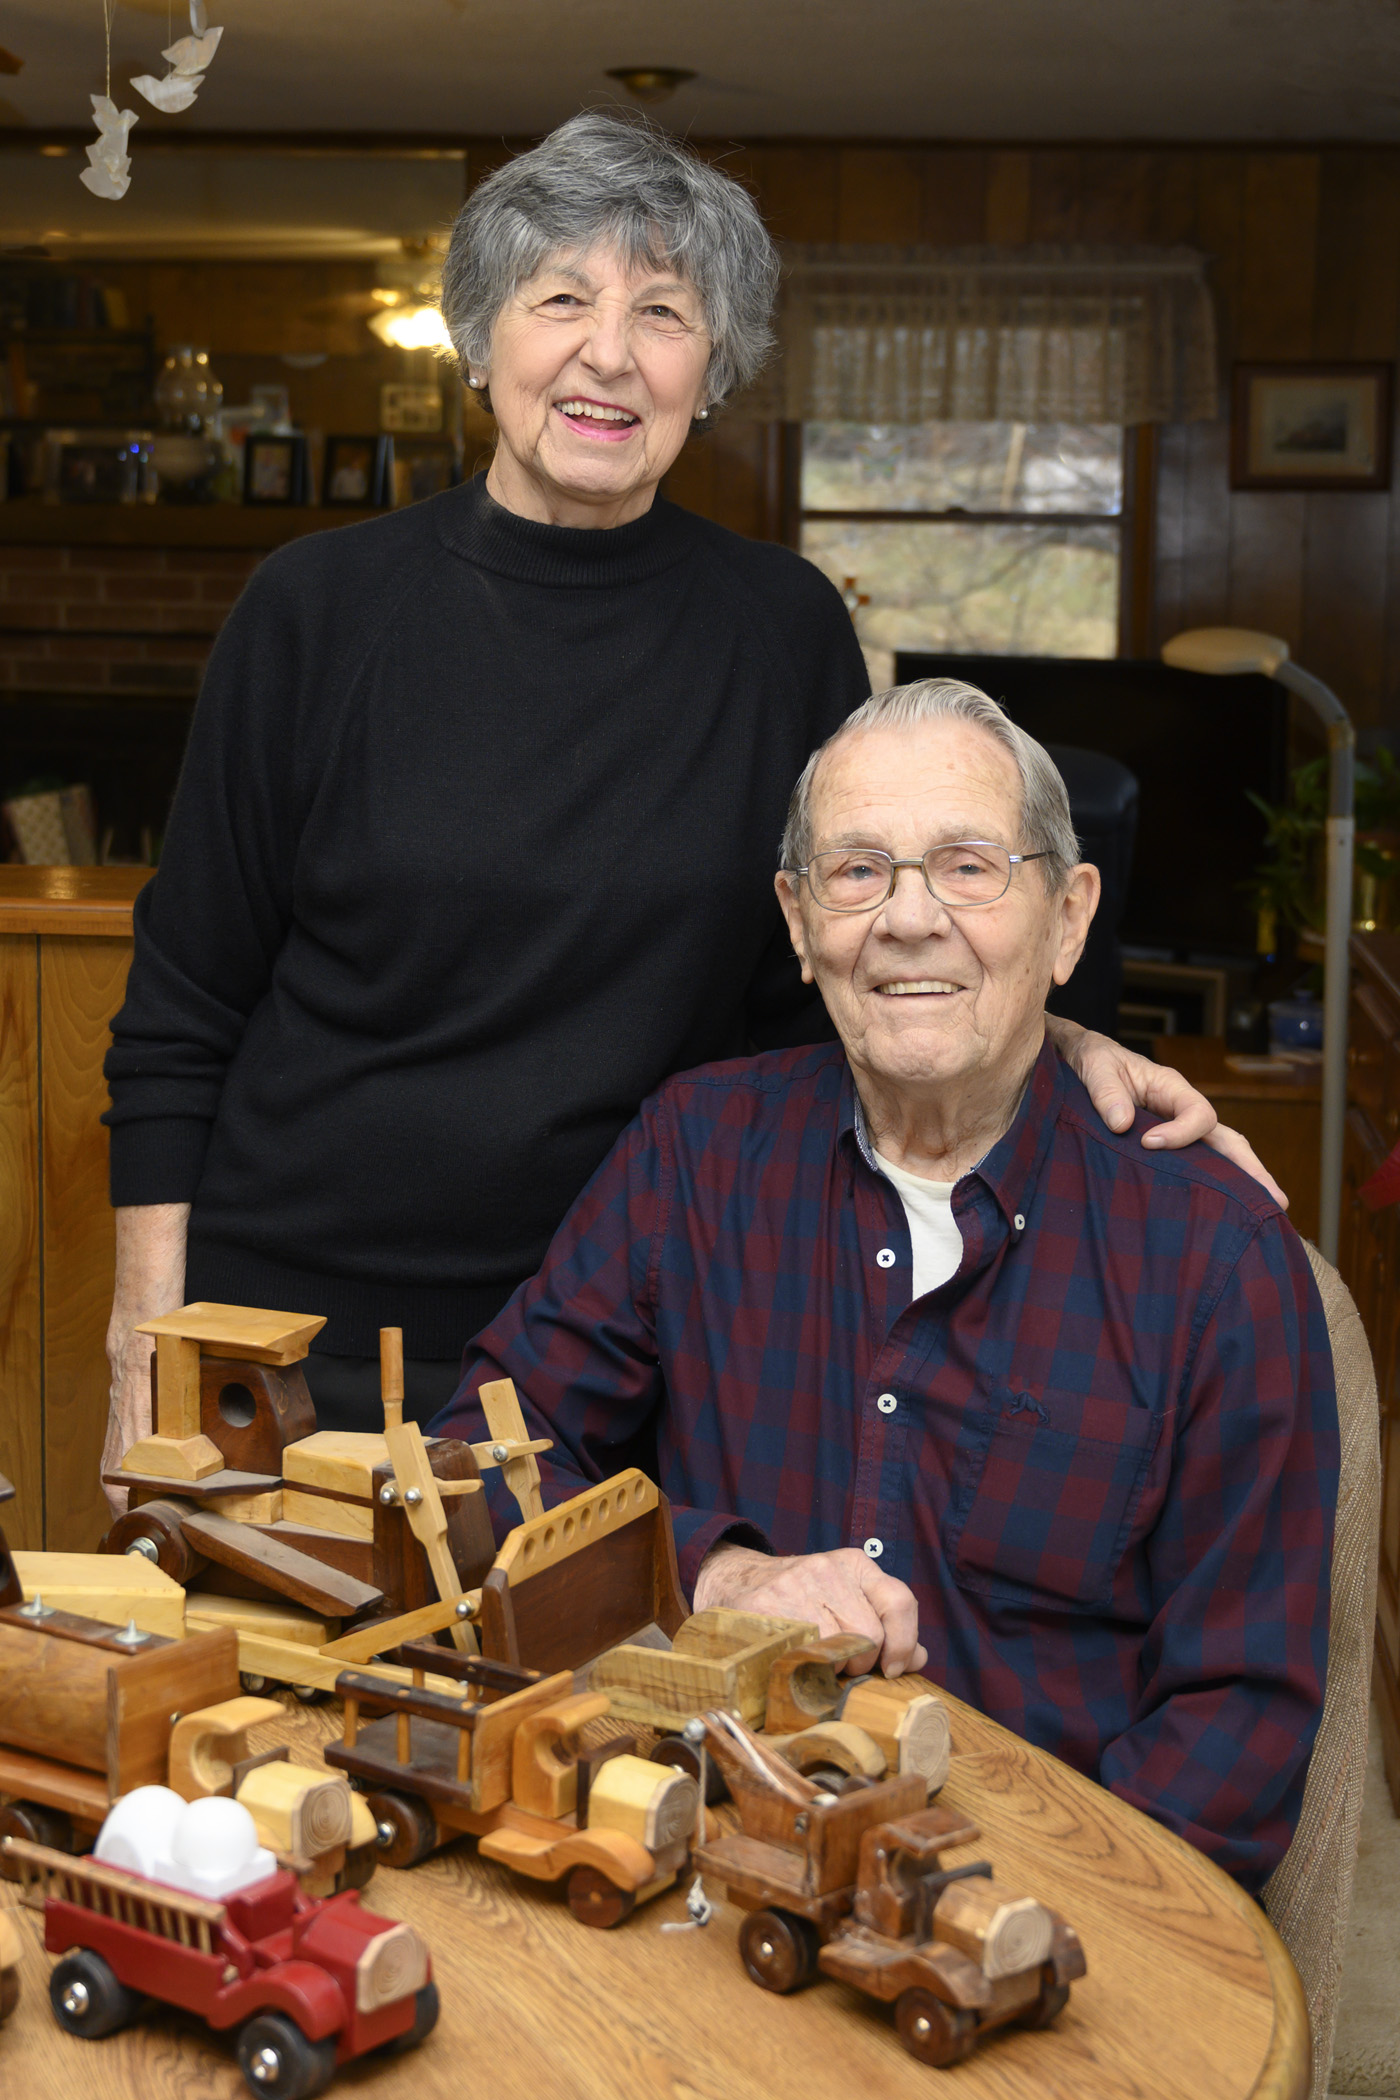 Carl and his wife, Vonnie, with his wooden toy trucks